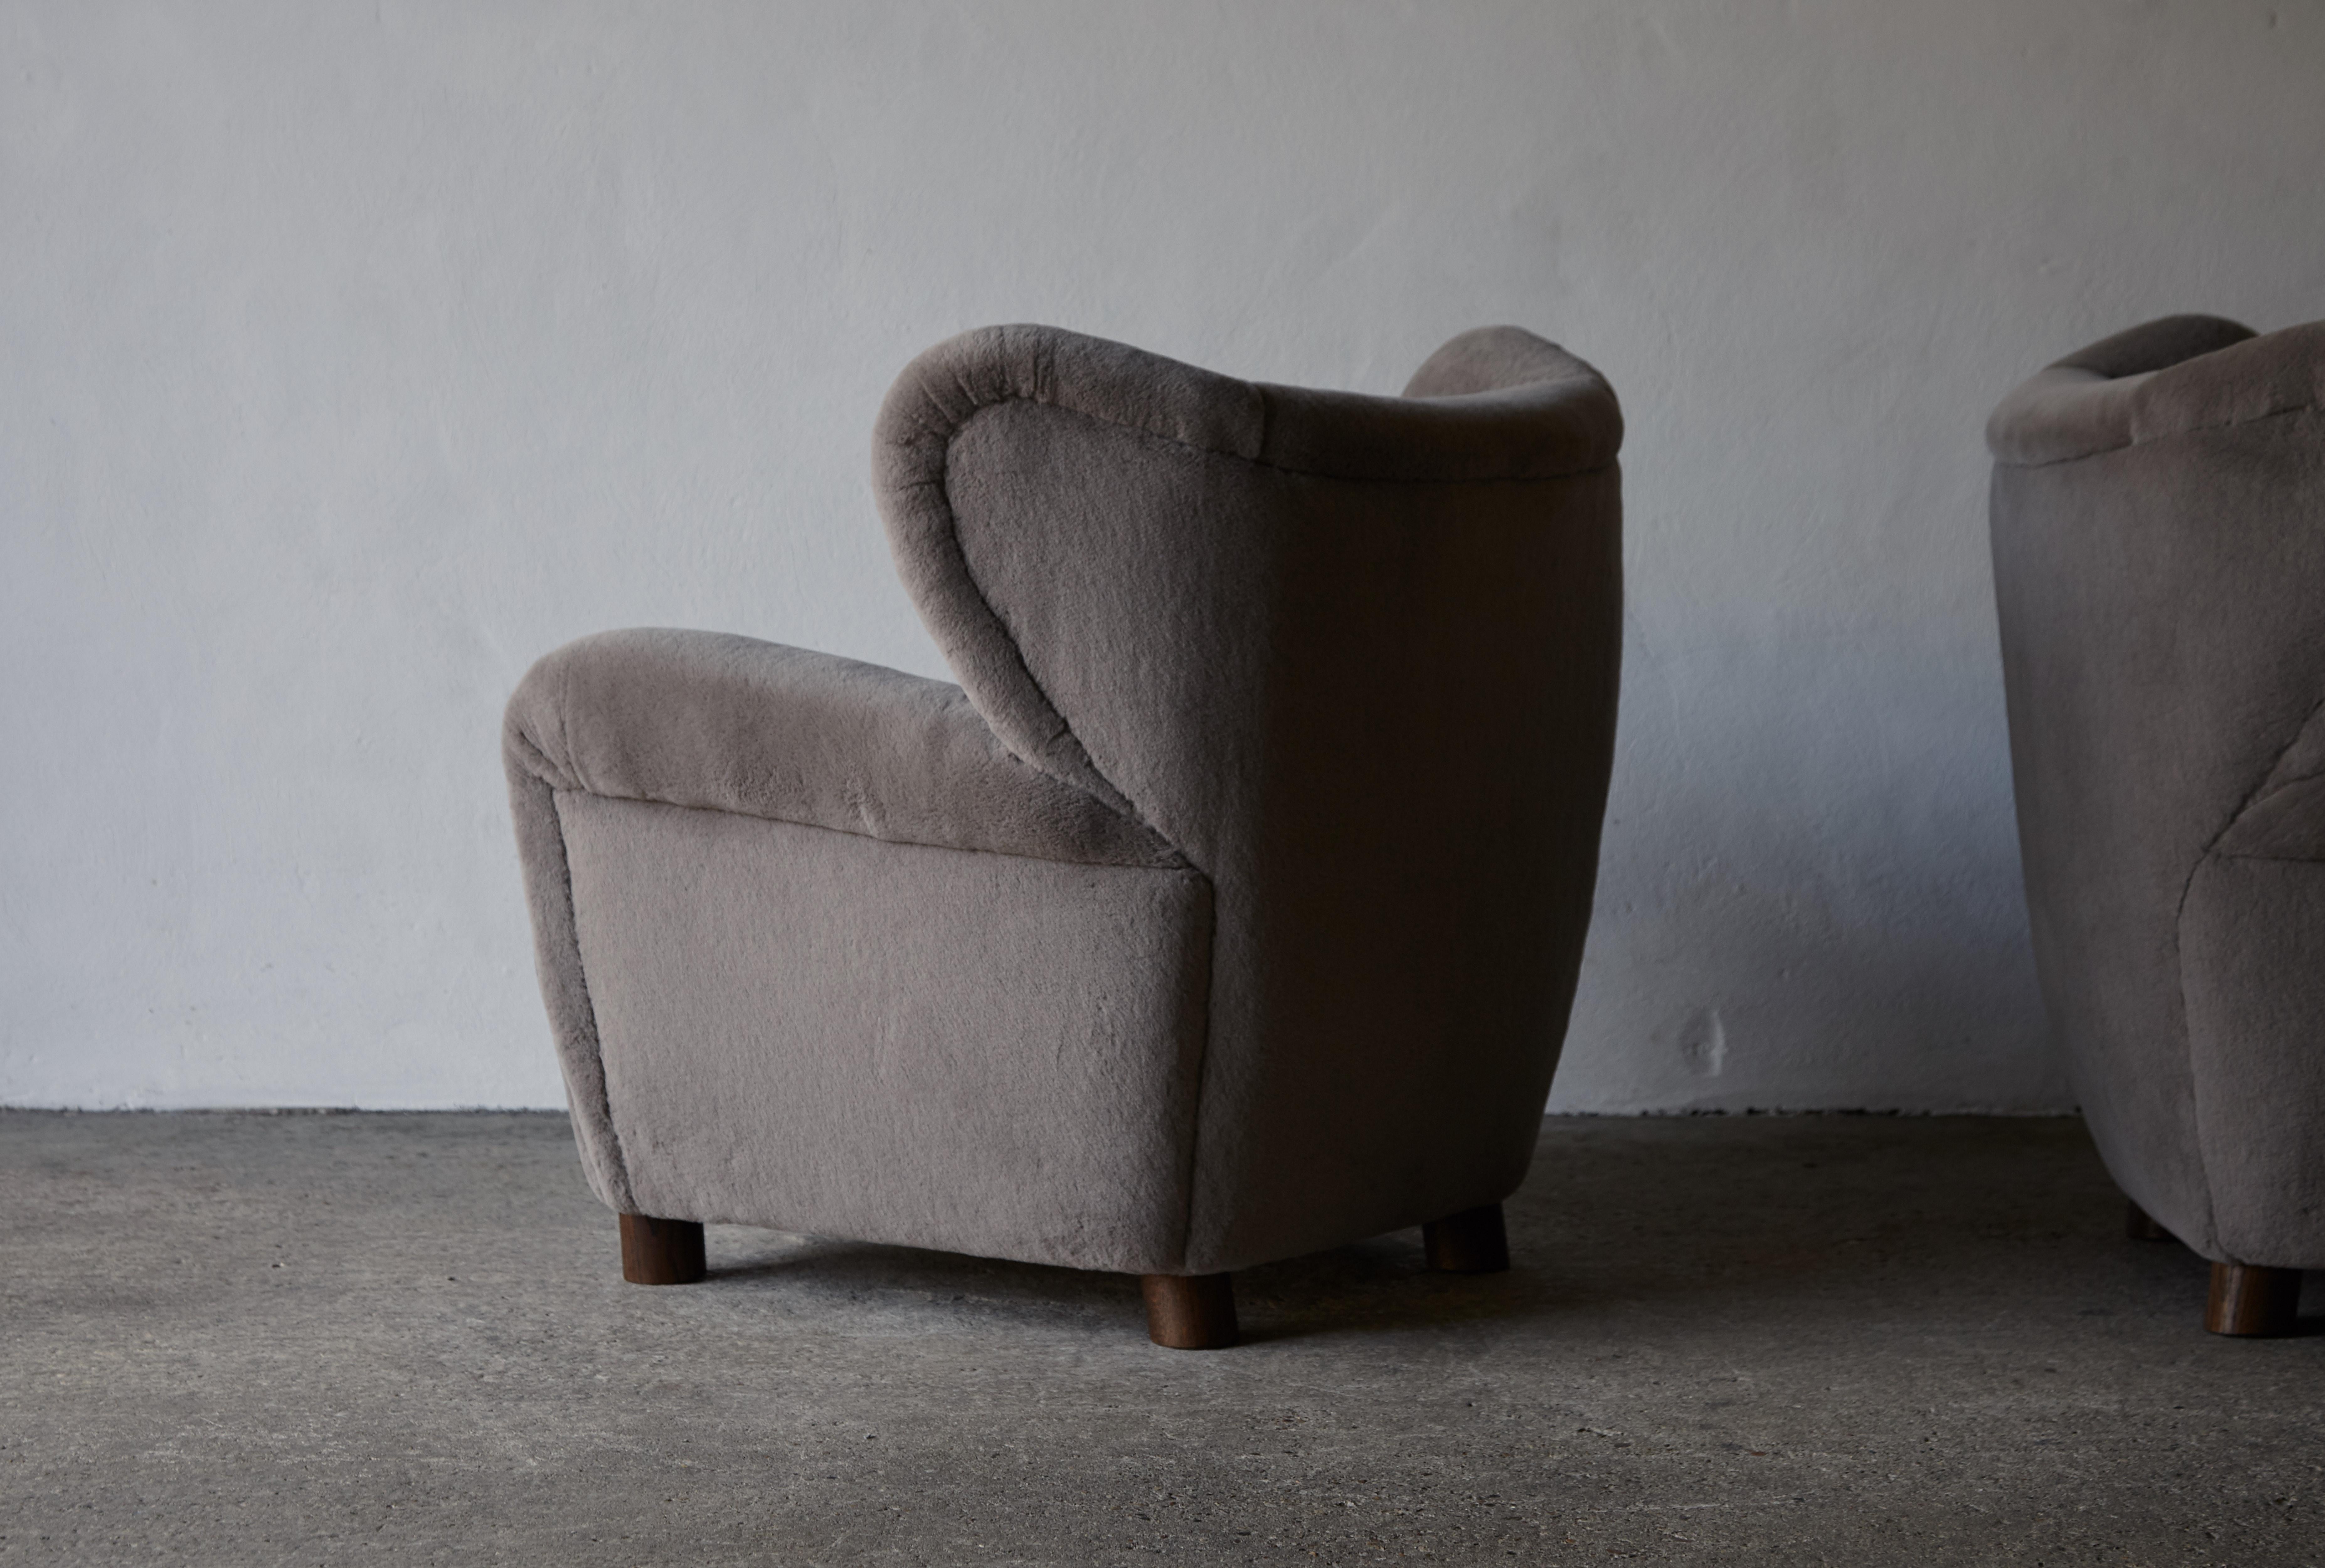 Superb Pair of Armchairs, Newly Upholstered in Pure Alpaca, Denmark, 1940s / 50s 11